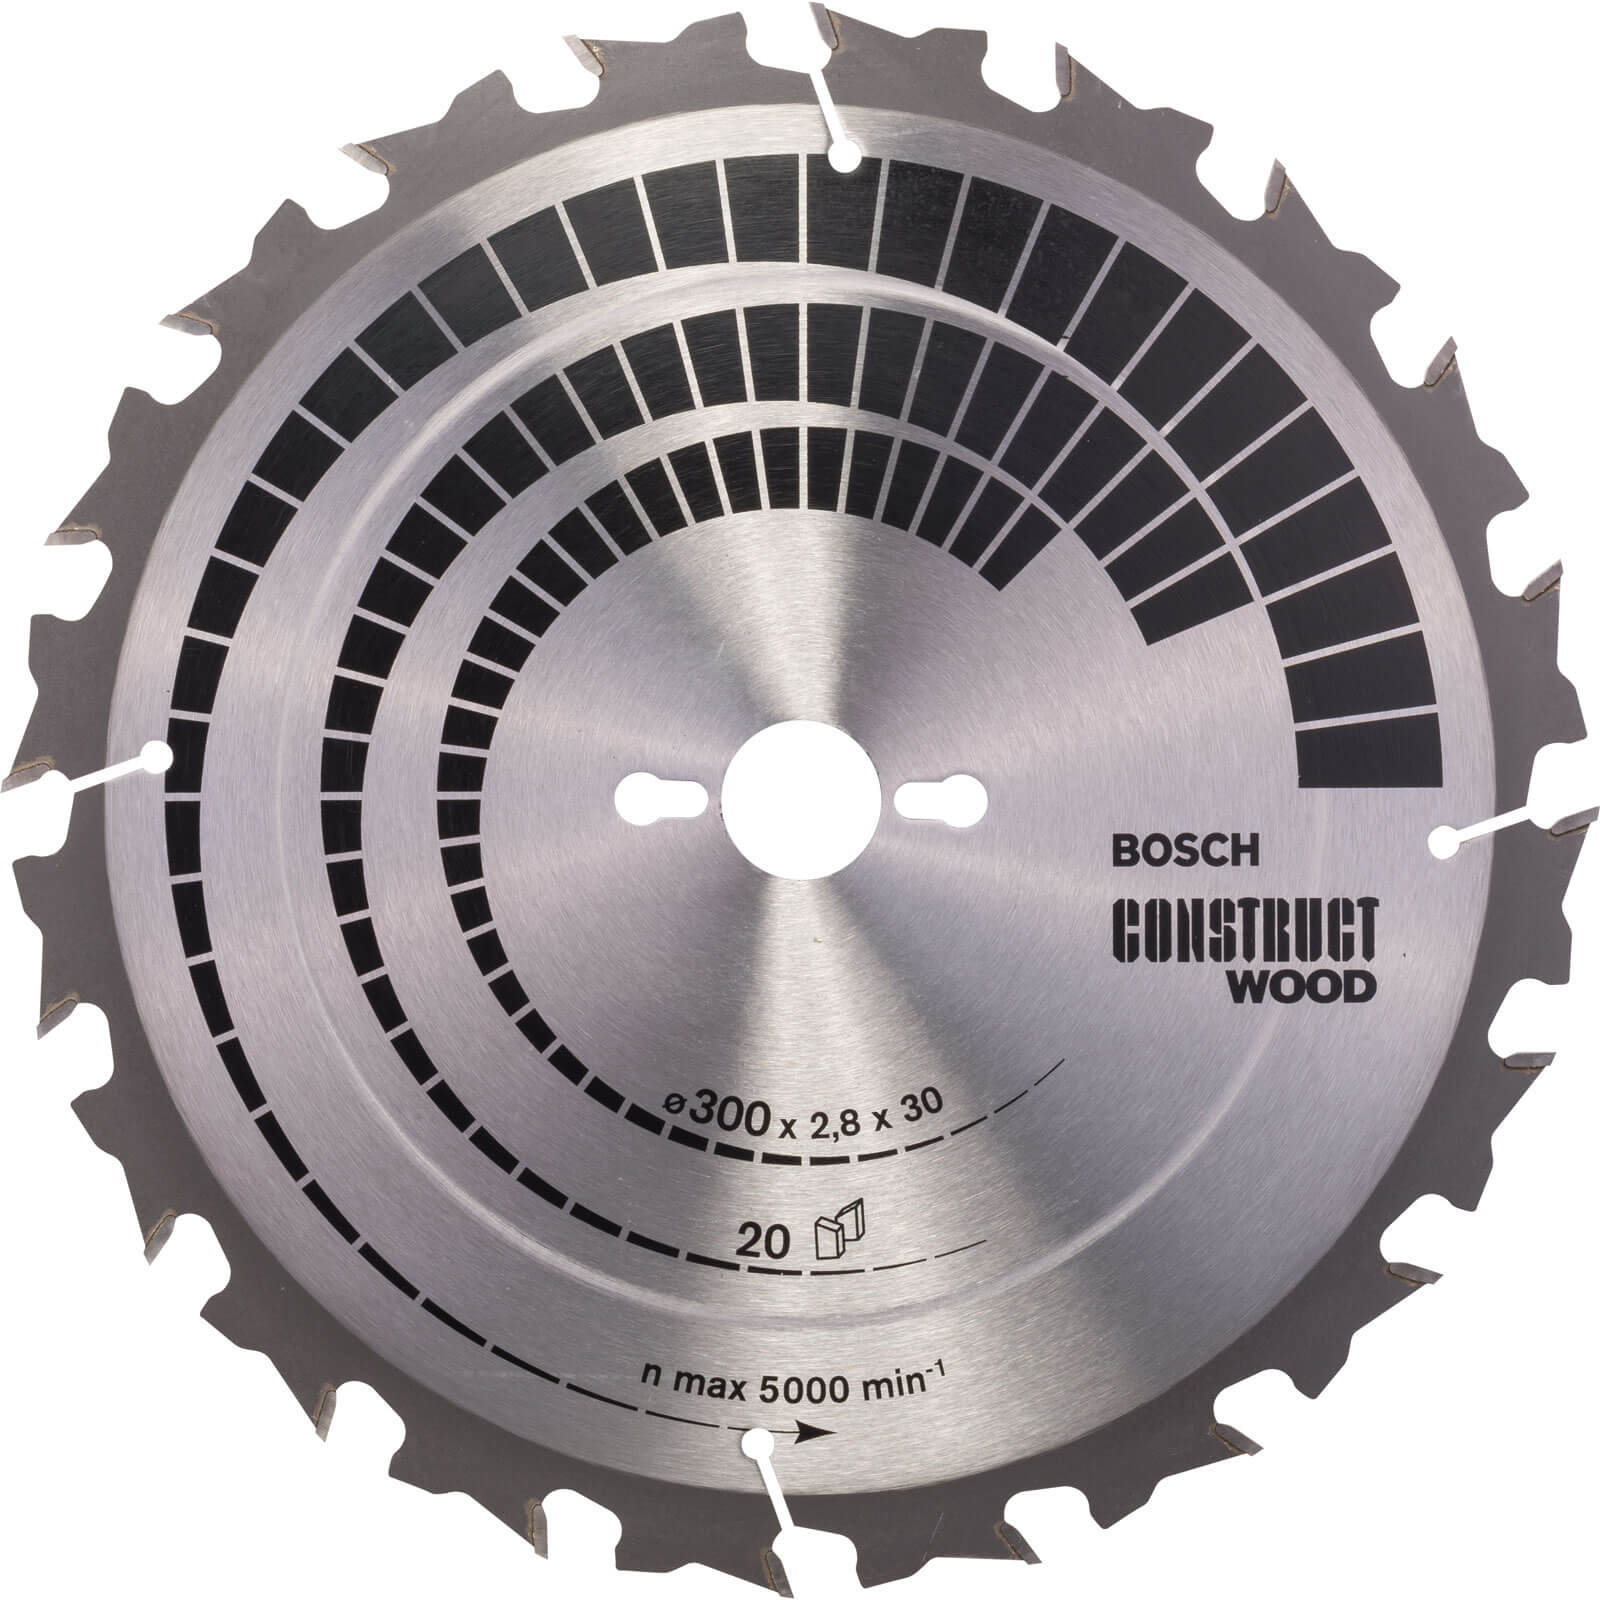 Photos - Power Tool Accessory Bosch Construct Wood Cutting Table Saw Blade 300mm 20T 30mm 